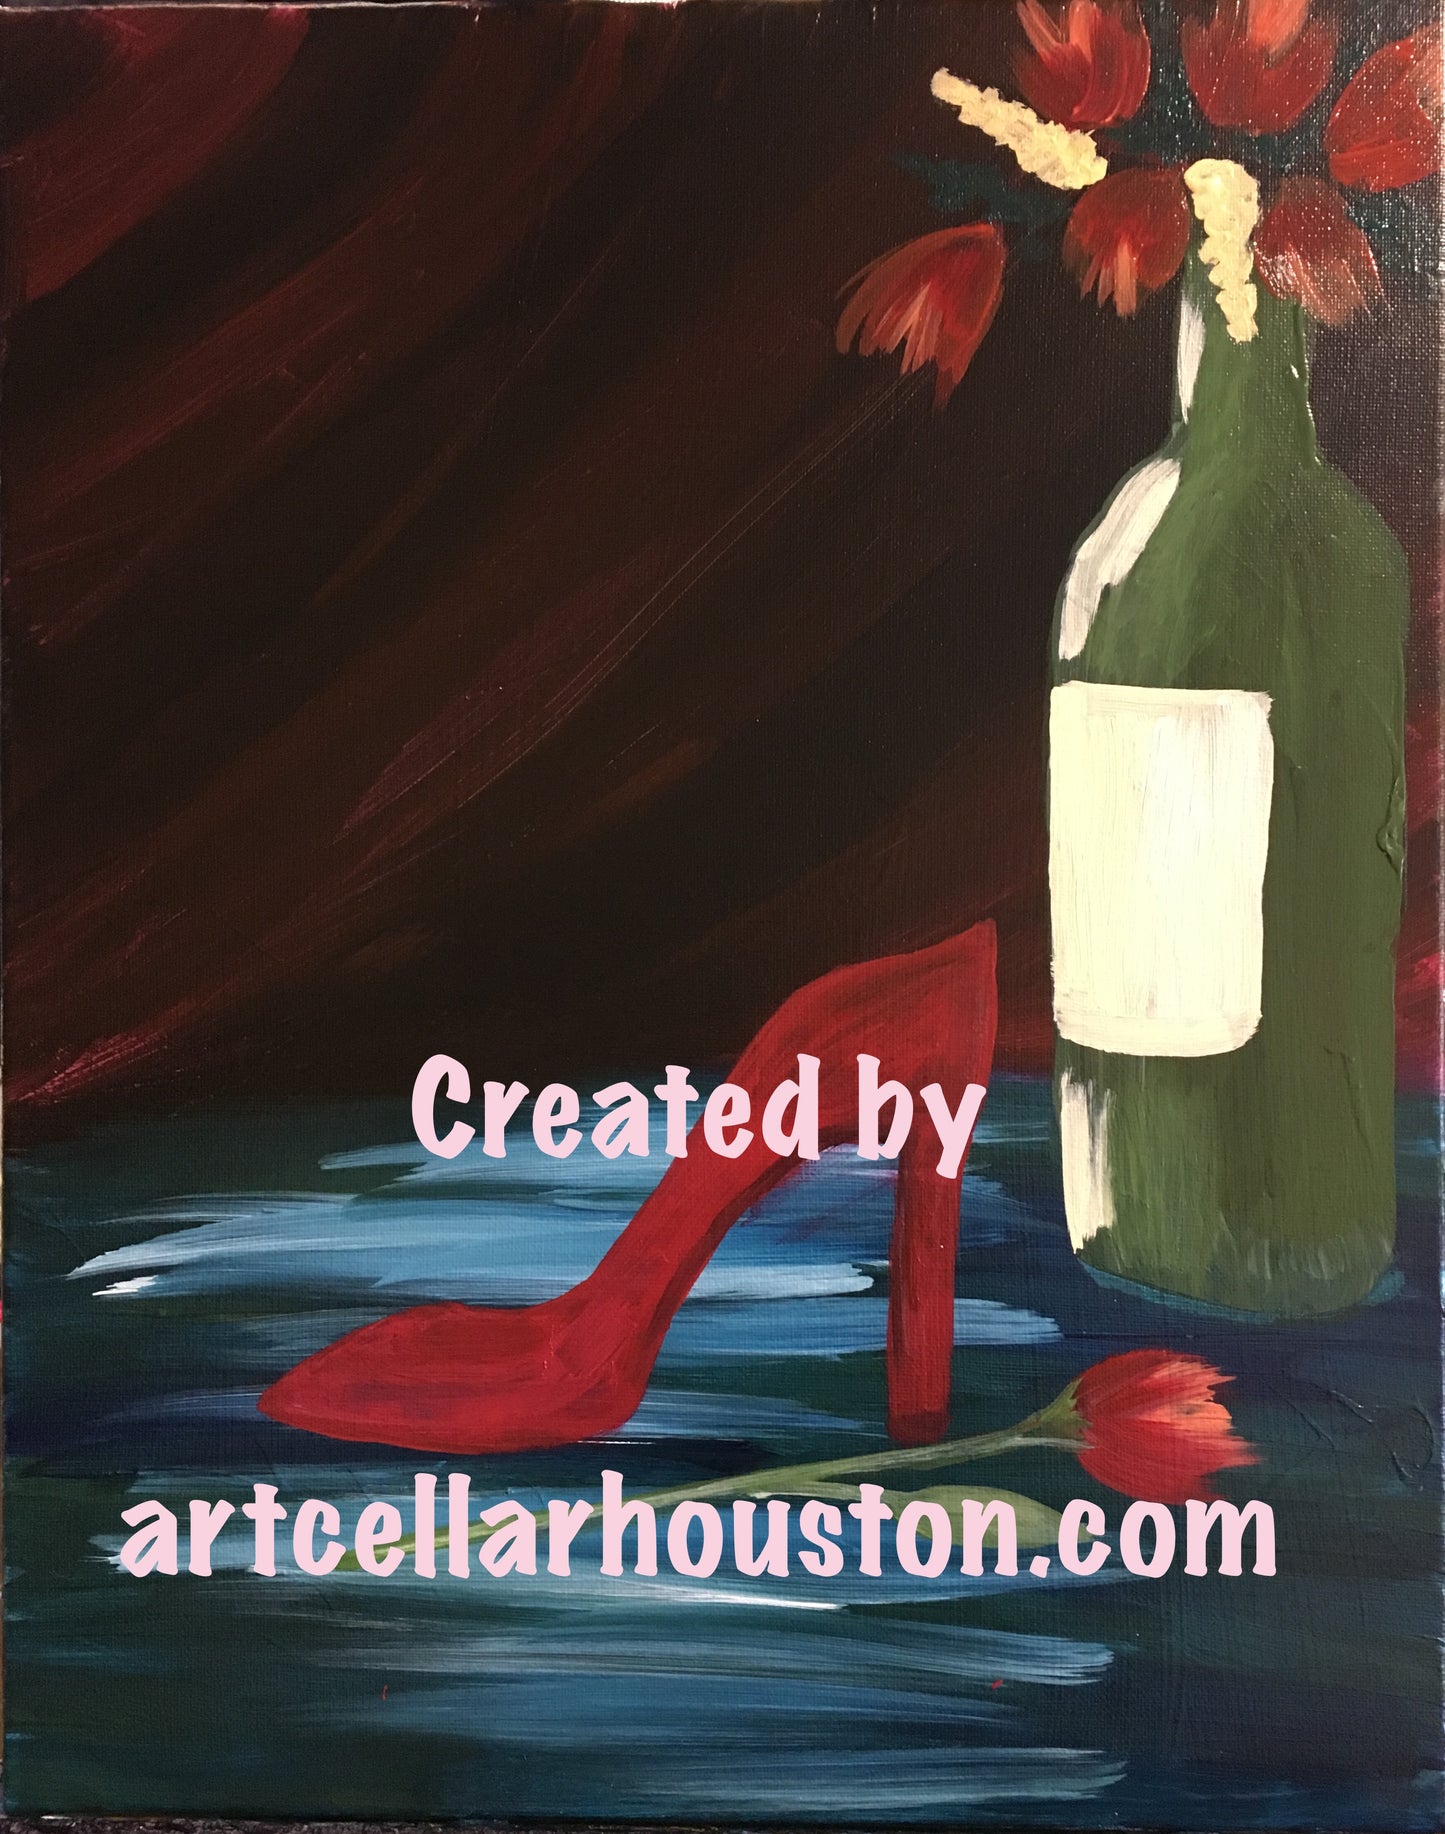 Sat, Oct 28, 2-5pm "Red Shoe Wine" Private Houston Wine and Painting Party